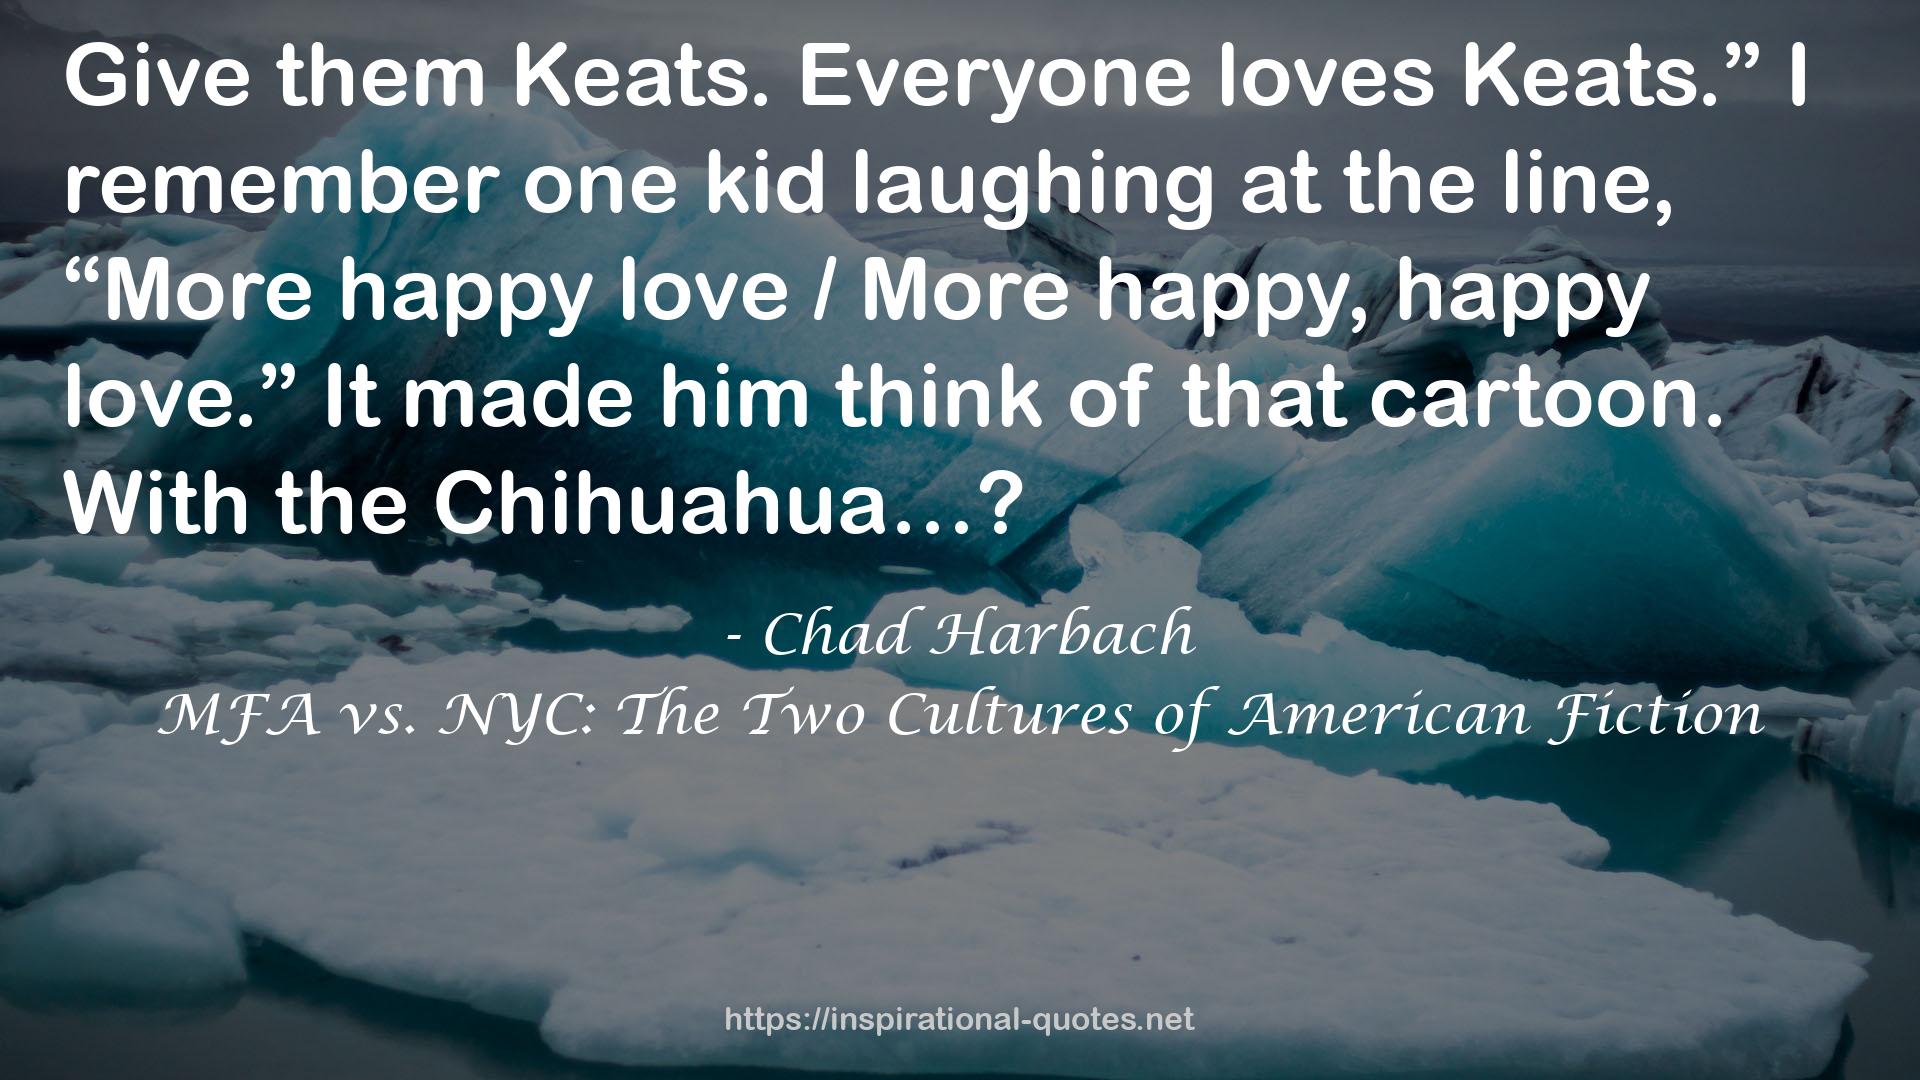 MFA vs. NYC: The Two Cultures of American Fiction QUOTES